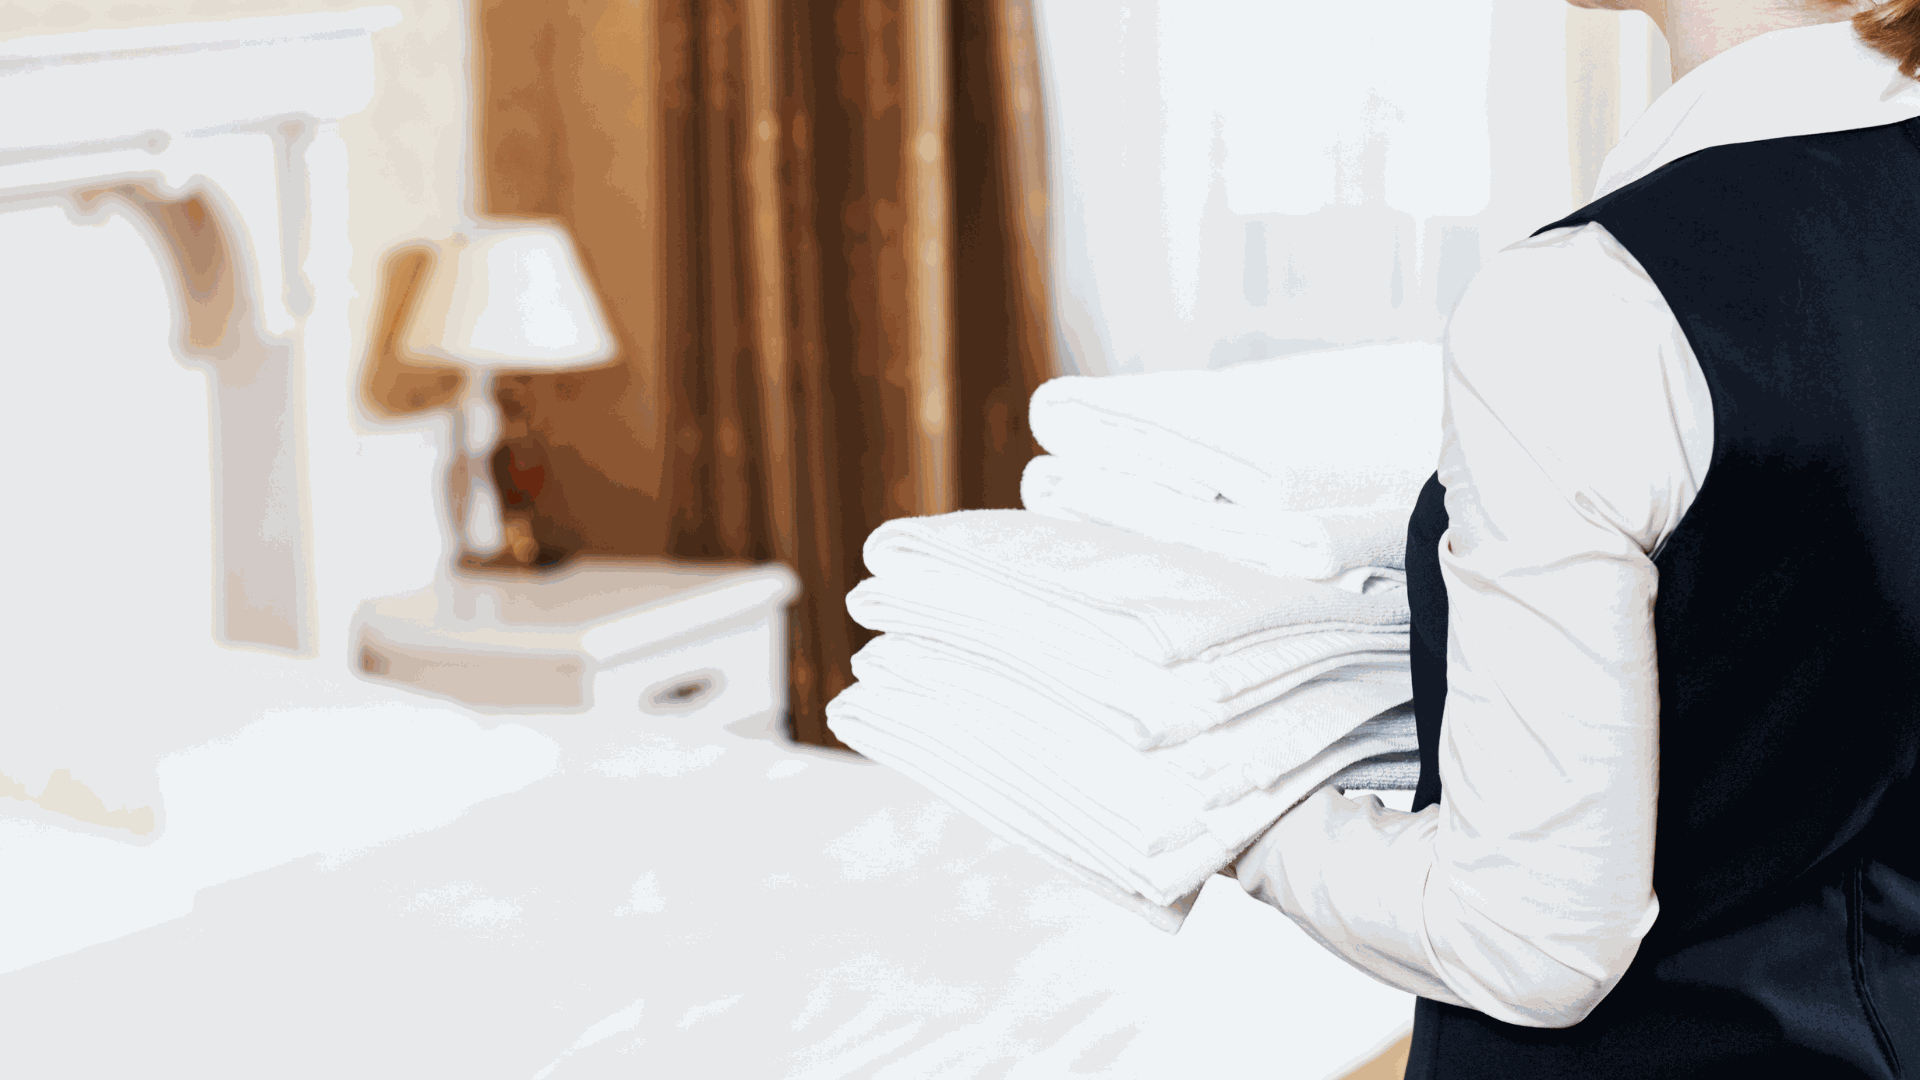 Housekeeping Bringing New Linens to Hotel Room